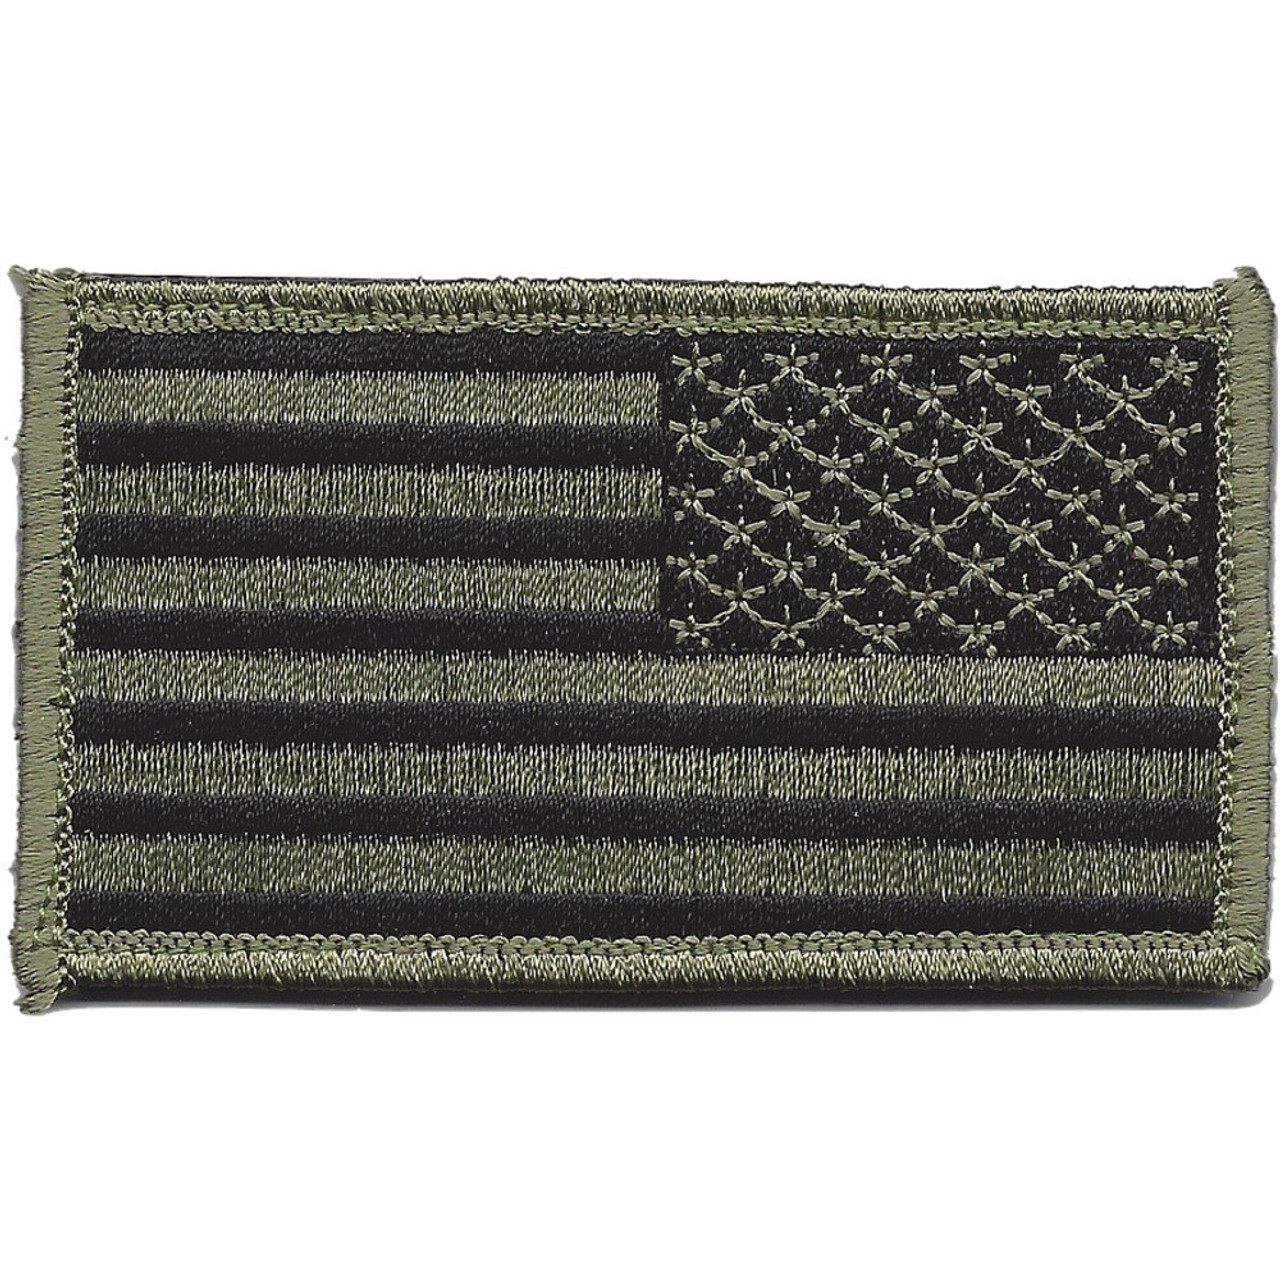 OLIVE DRAB OD GREEN SUBDUED AMERICAN FLAG PATCH HOOK AND LOOP BACK